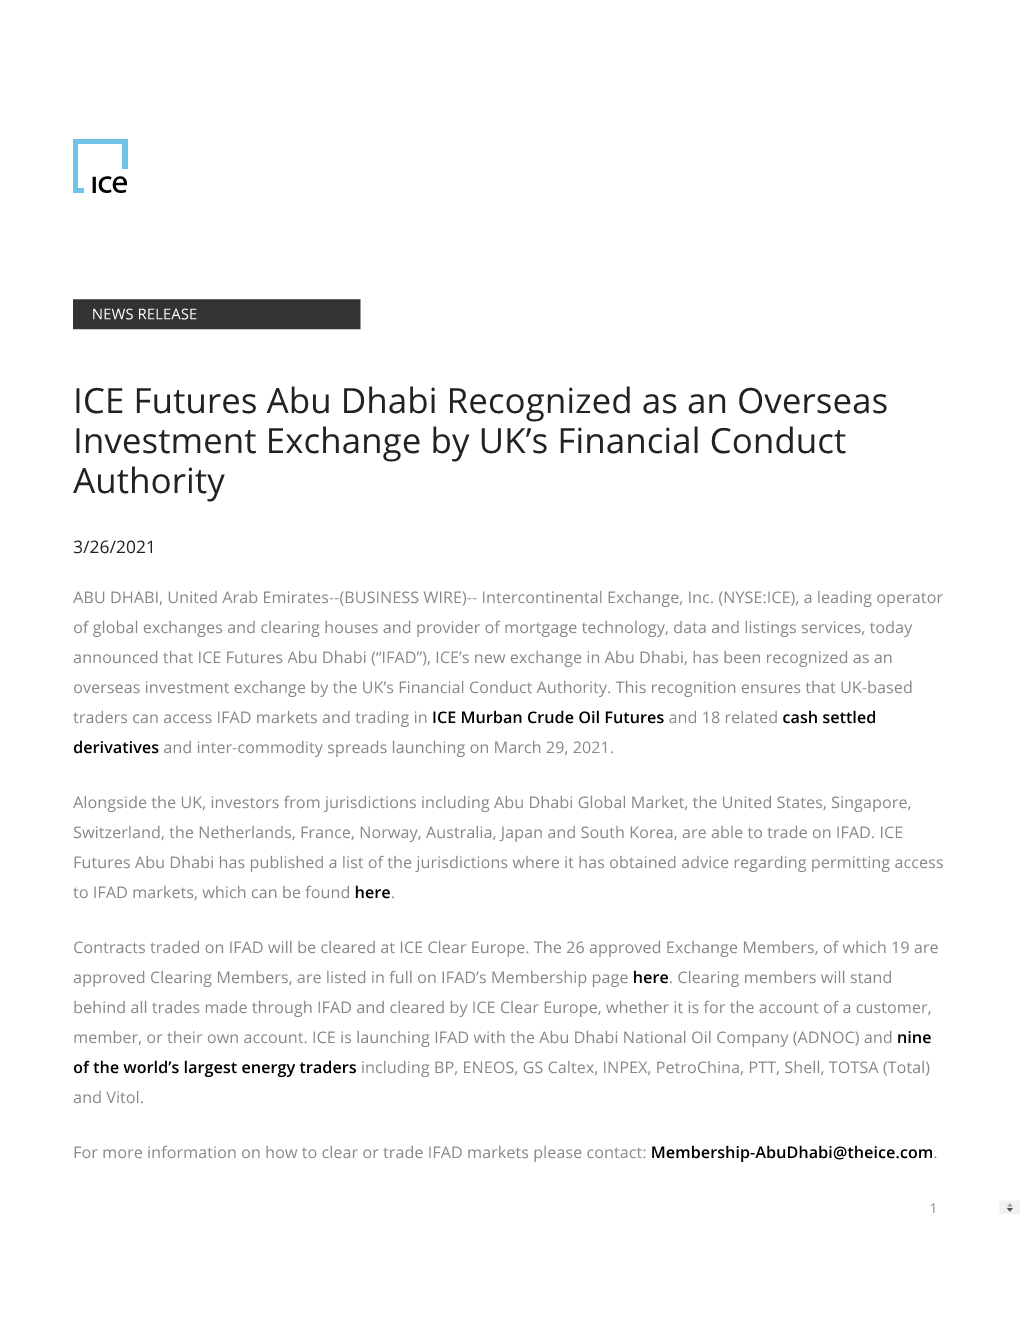 ICE Futures Abu Dhabi Recognized As an Overseas Investment Exchange by UK’S Financial Conduct Authority